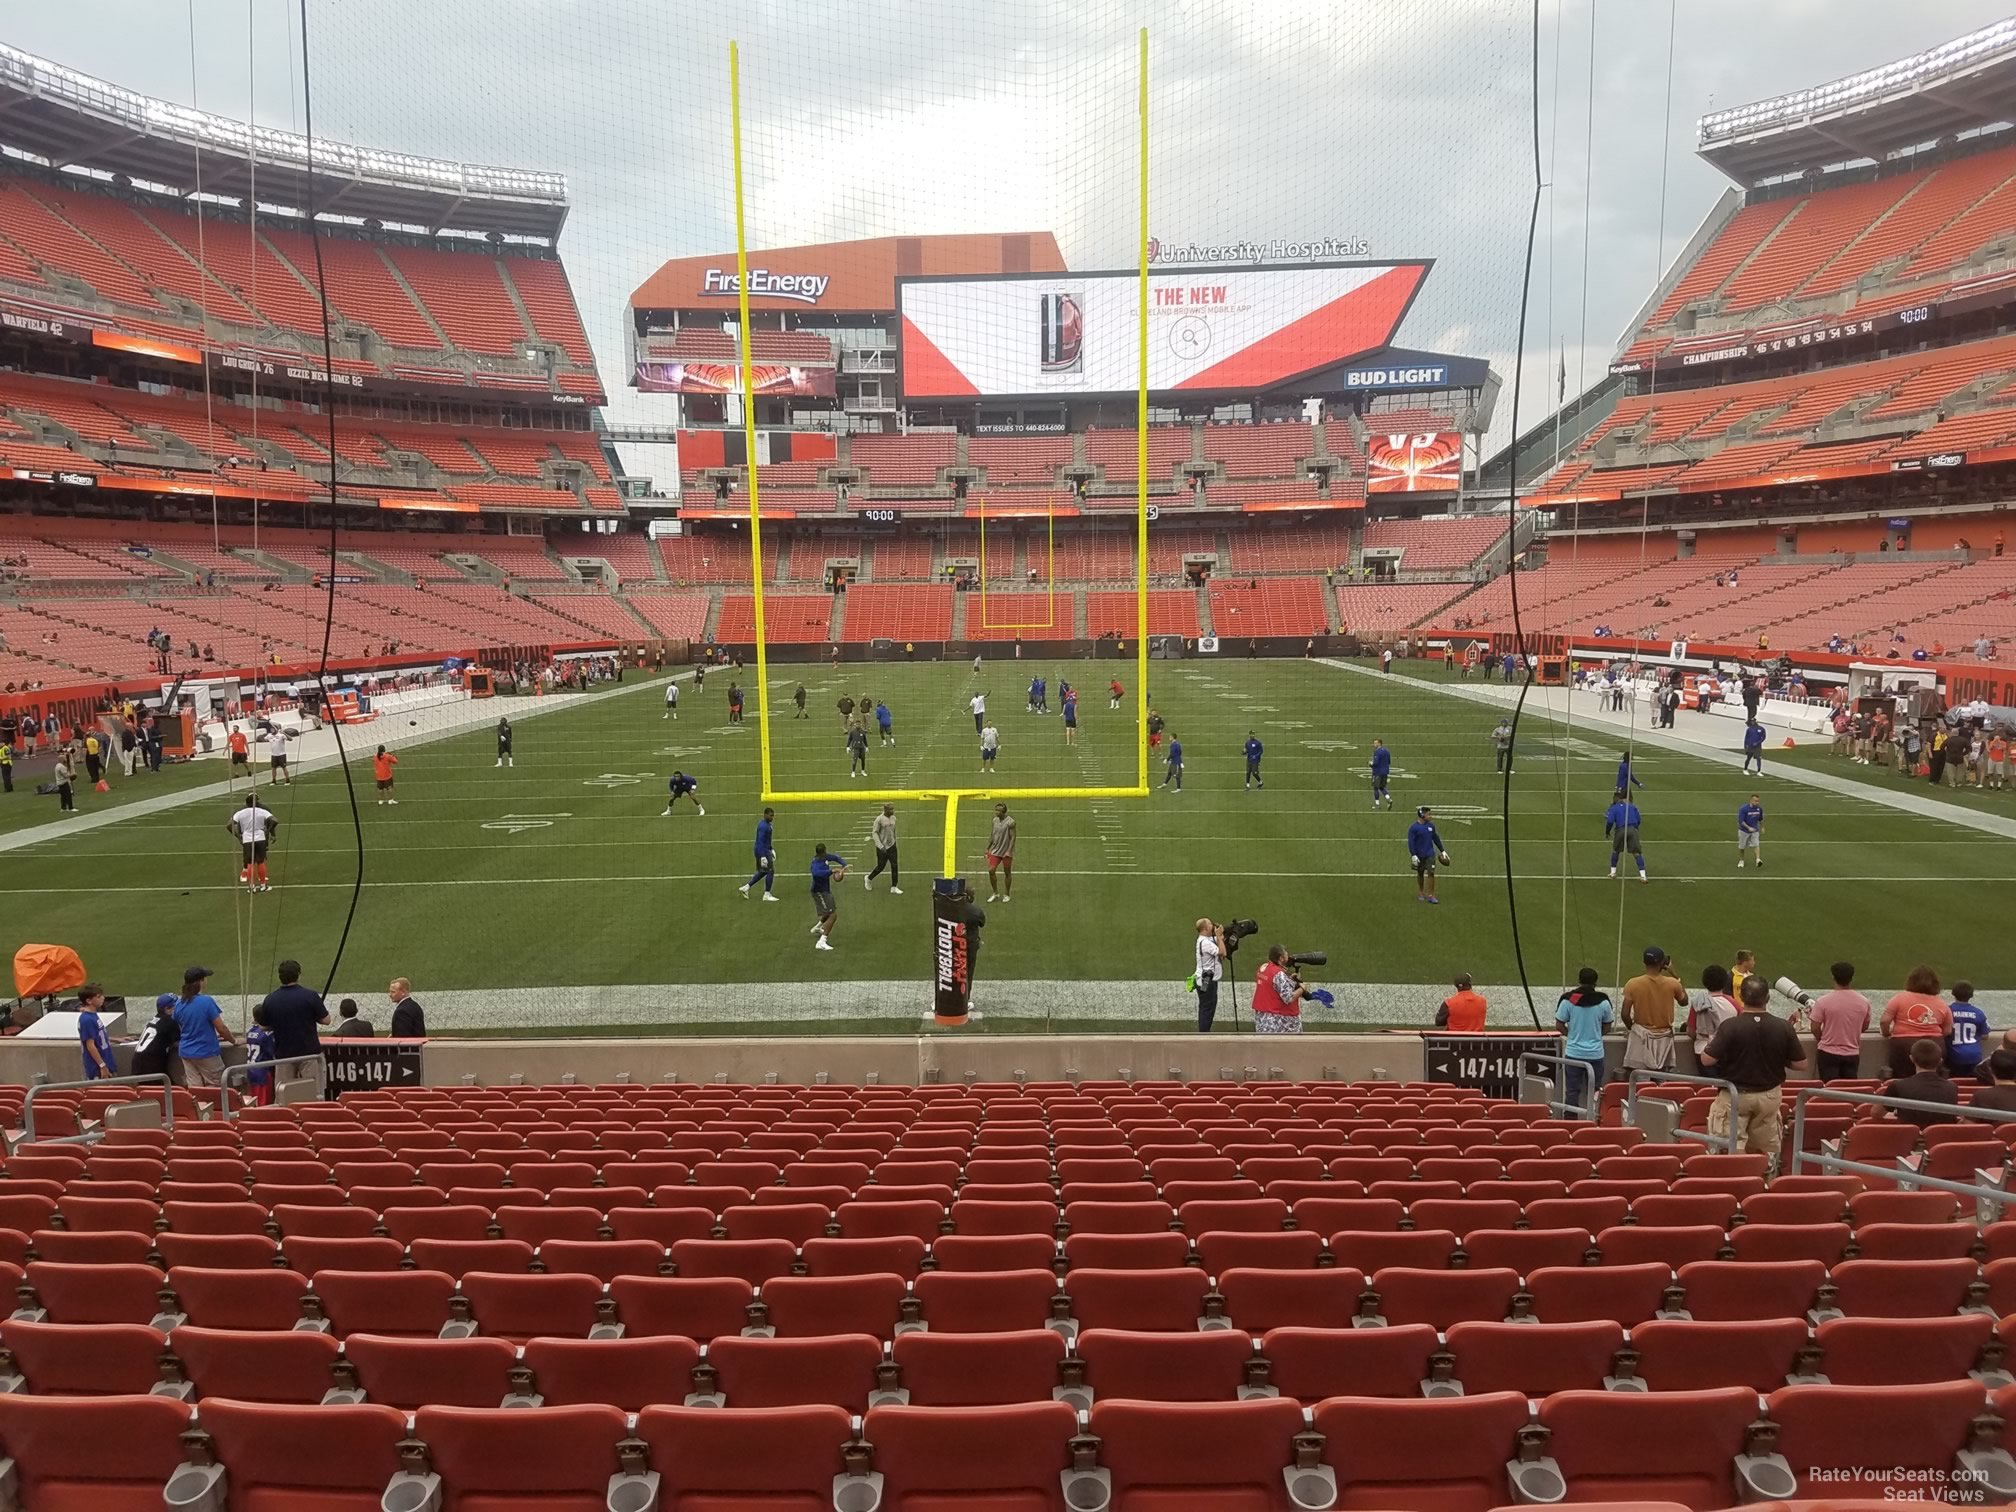 section 147, row 17 seat view  - cleveland browns stadium